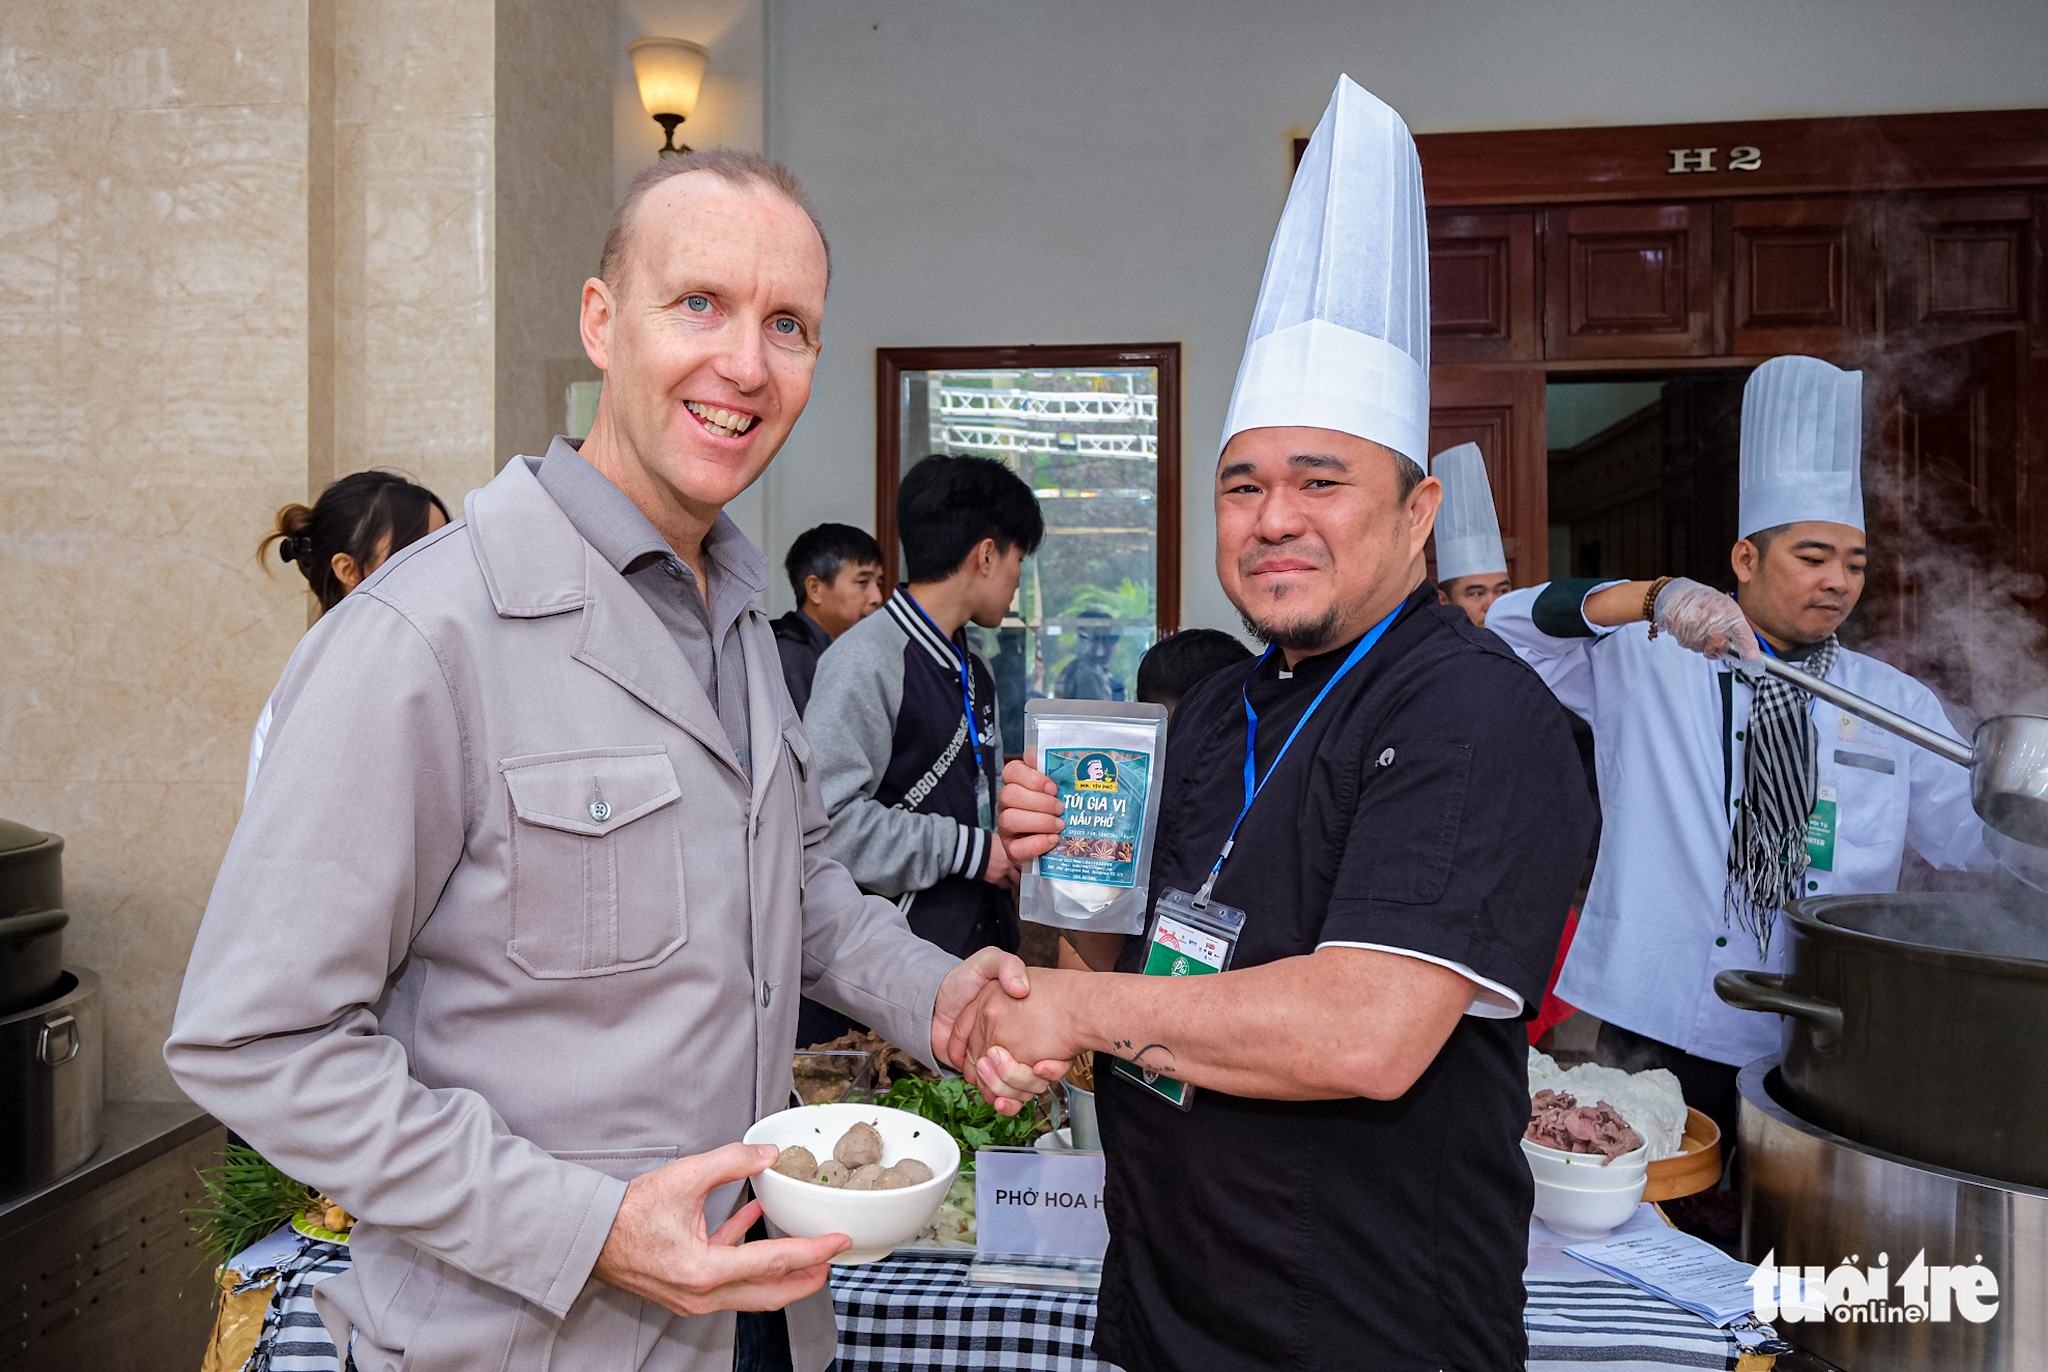 Warrant Officer Class Two Mark Phillips (L) of the Australian Embassy in Vietnam shakes hand with Cao Van Luan, winner of the 2019 Golden Star Anise award, at the Day of Pho event organized by Tuoi Tre (Youth) newspaper in Nam Dinh Province, Vietnam, December 10, 2022. Photo: Nam Tran / Tuoi Tre